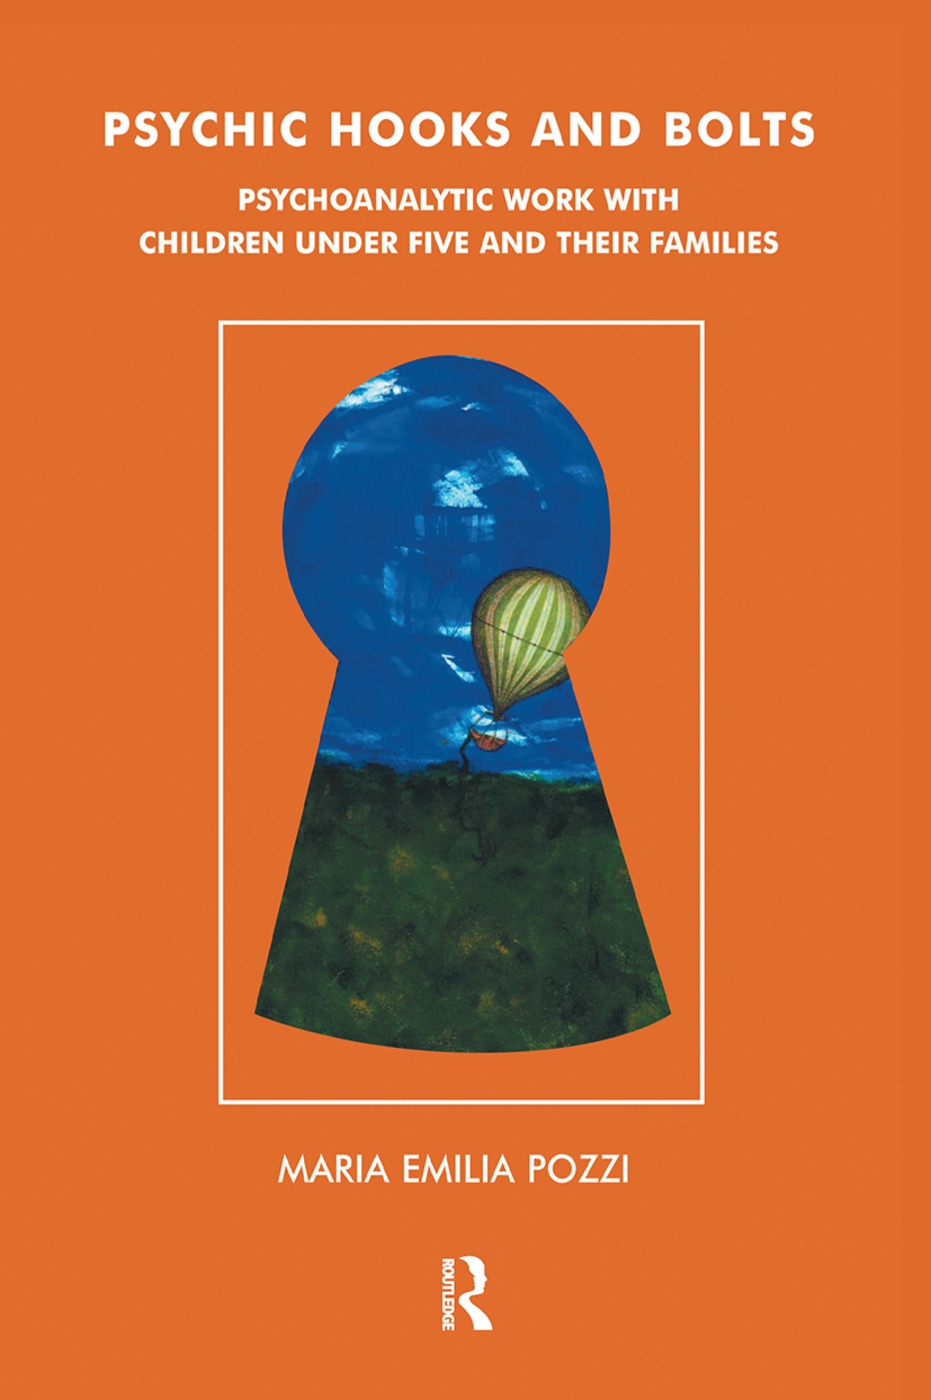 Psychic Hooks and Bolts: Psychoanalytic Work with Children Under Five and Their Families